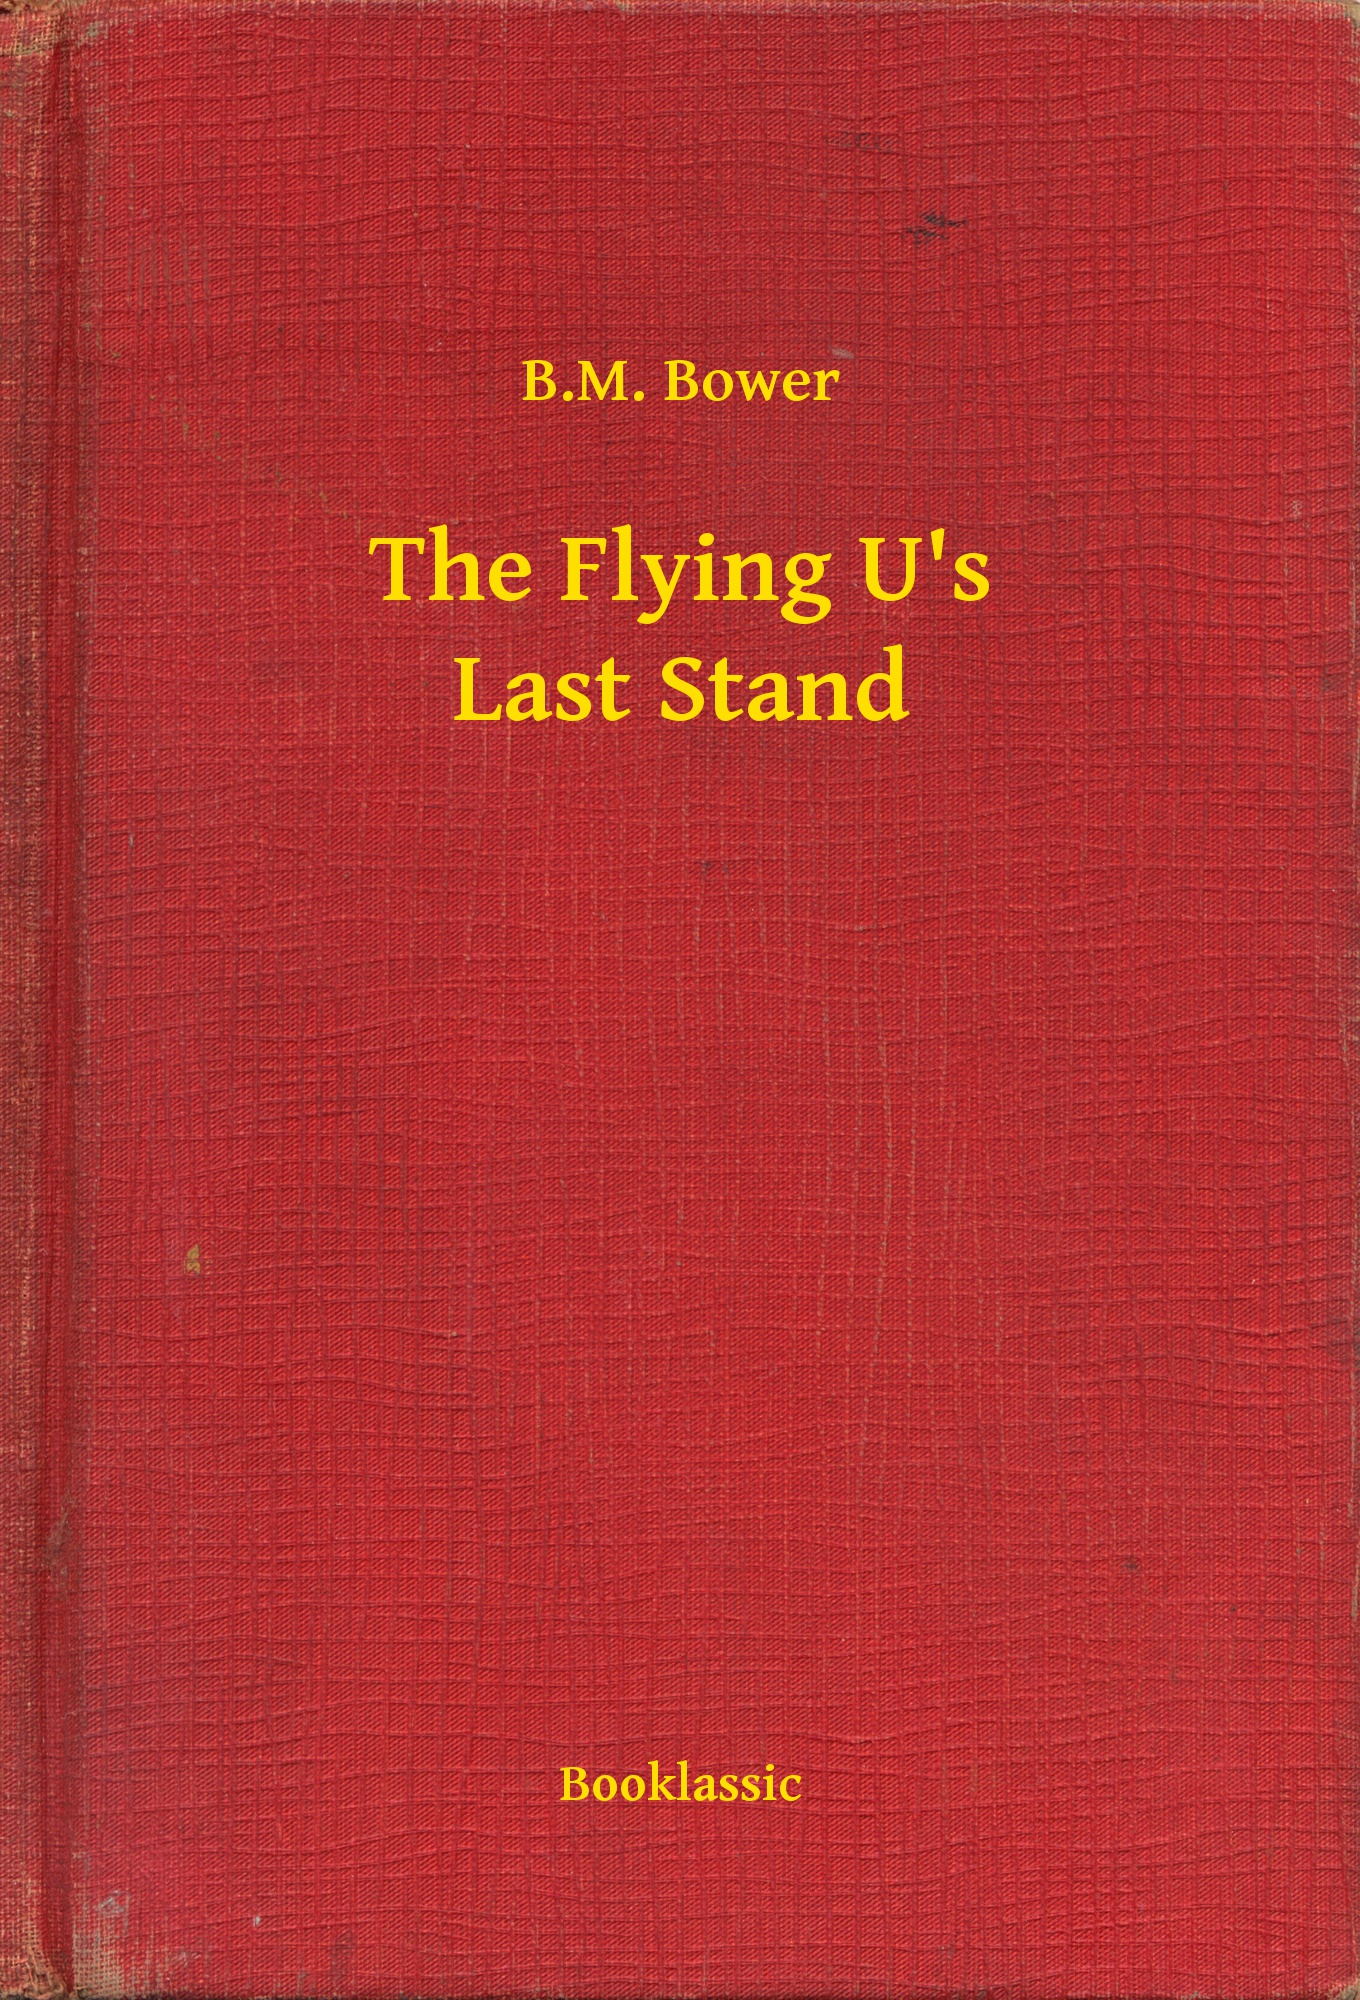 The Flying U"s Last Stand